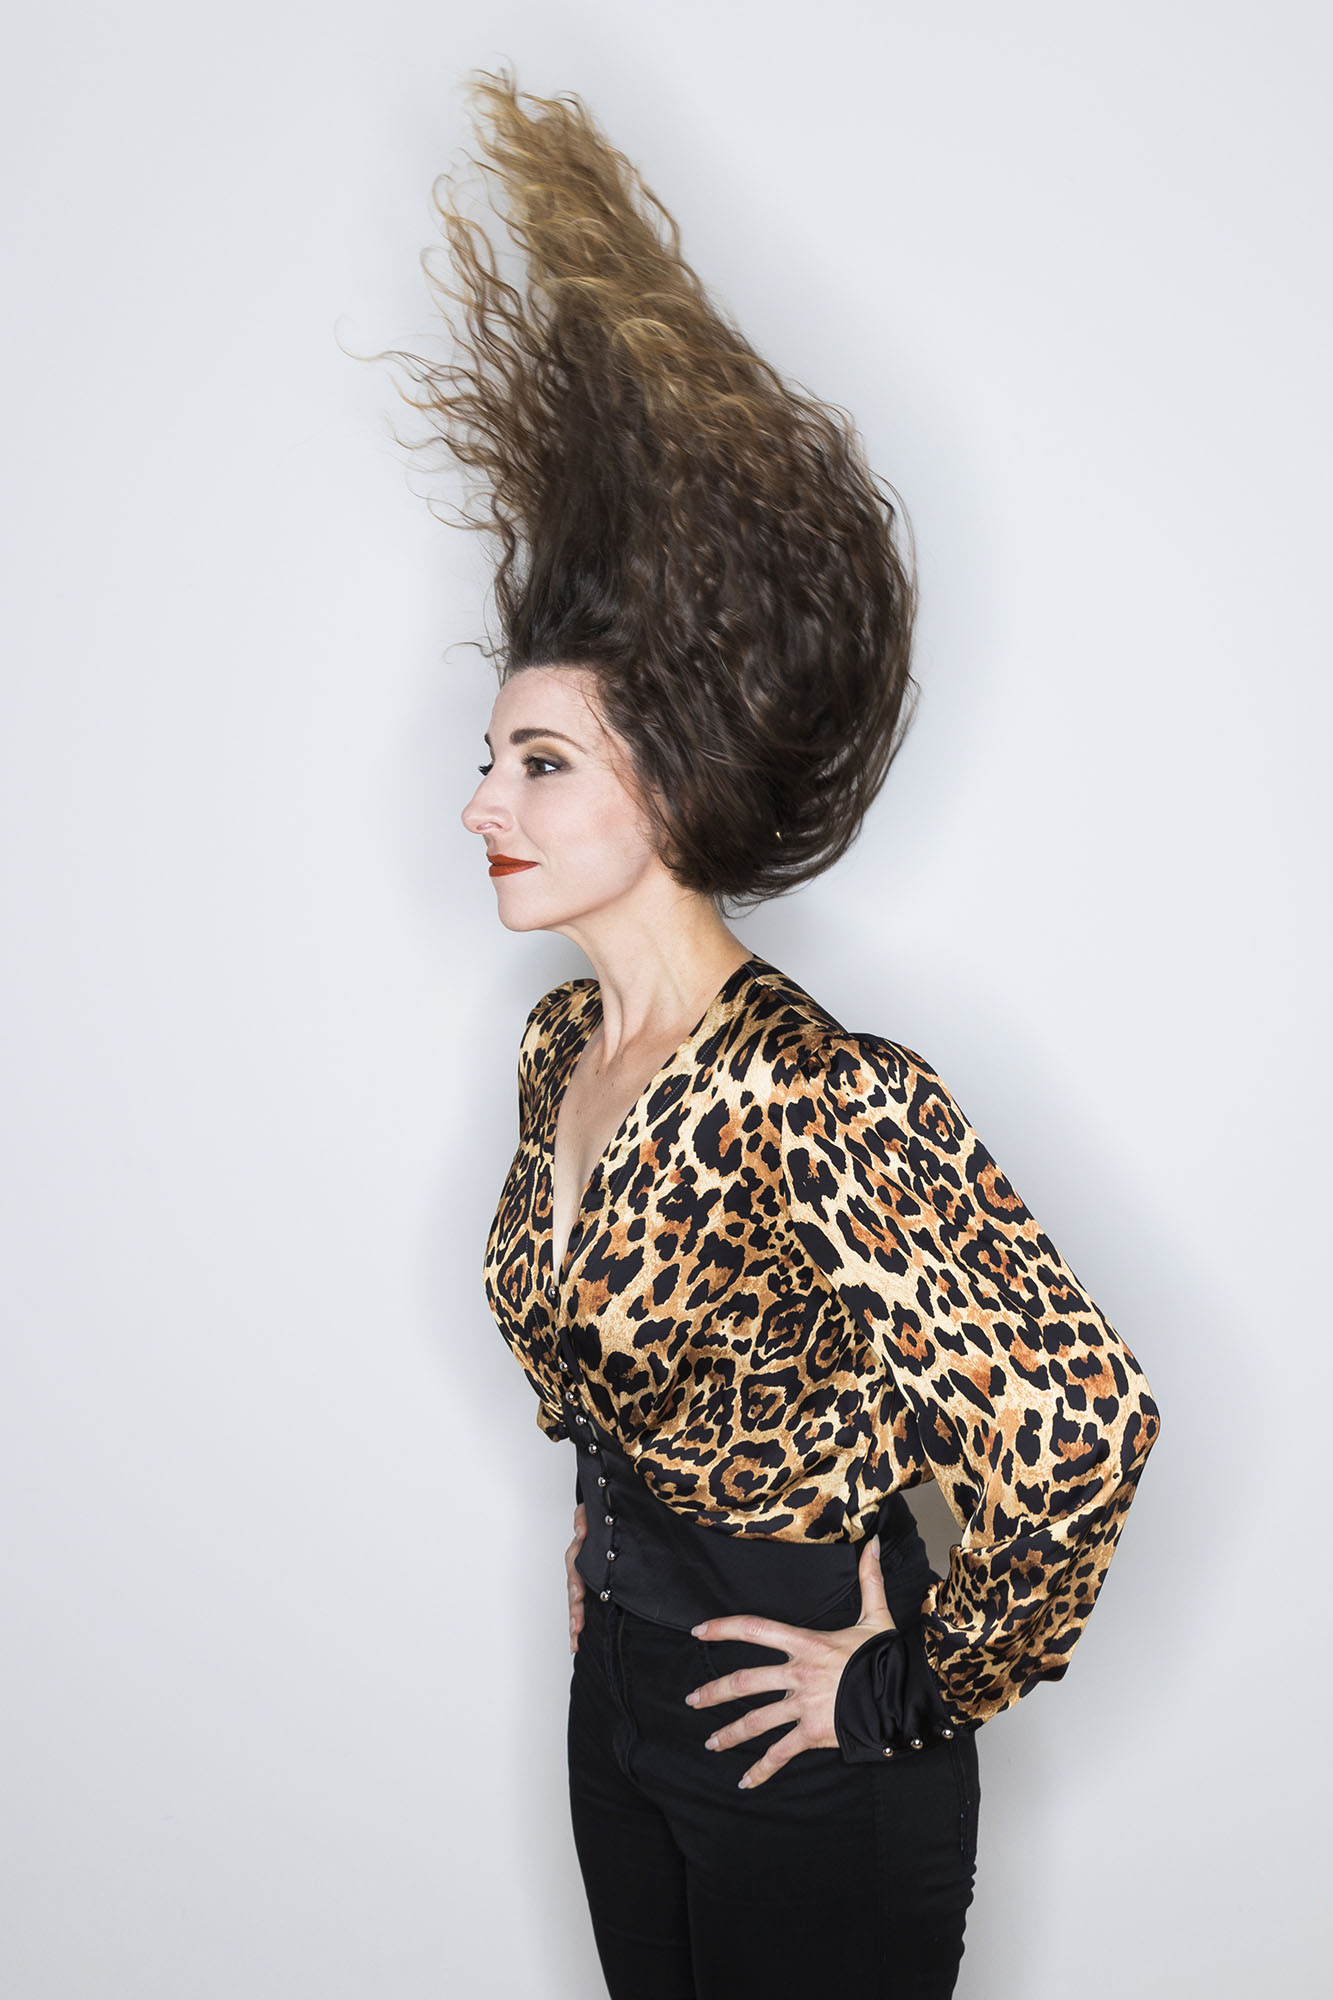 Picture of Eve-Maud Hubeaux in leopard top and hair in the wind